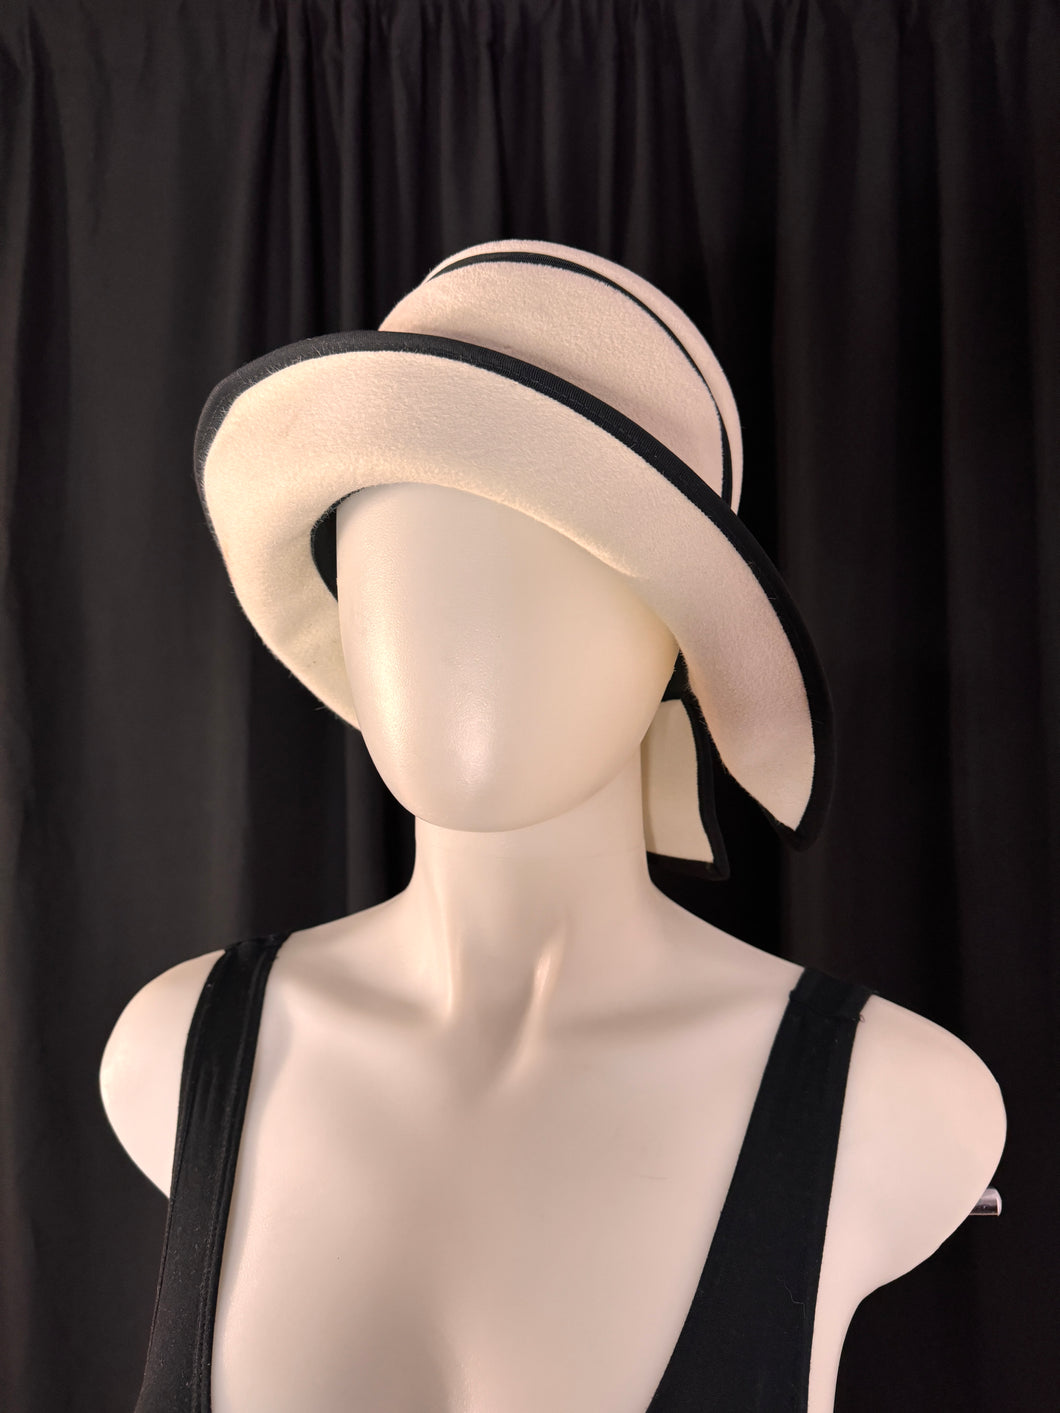 3/4 view of black and white cloche hat designed by Mr John Jr, a celebrated hat designer of post war 1960s.